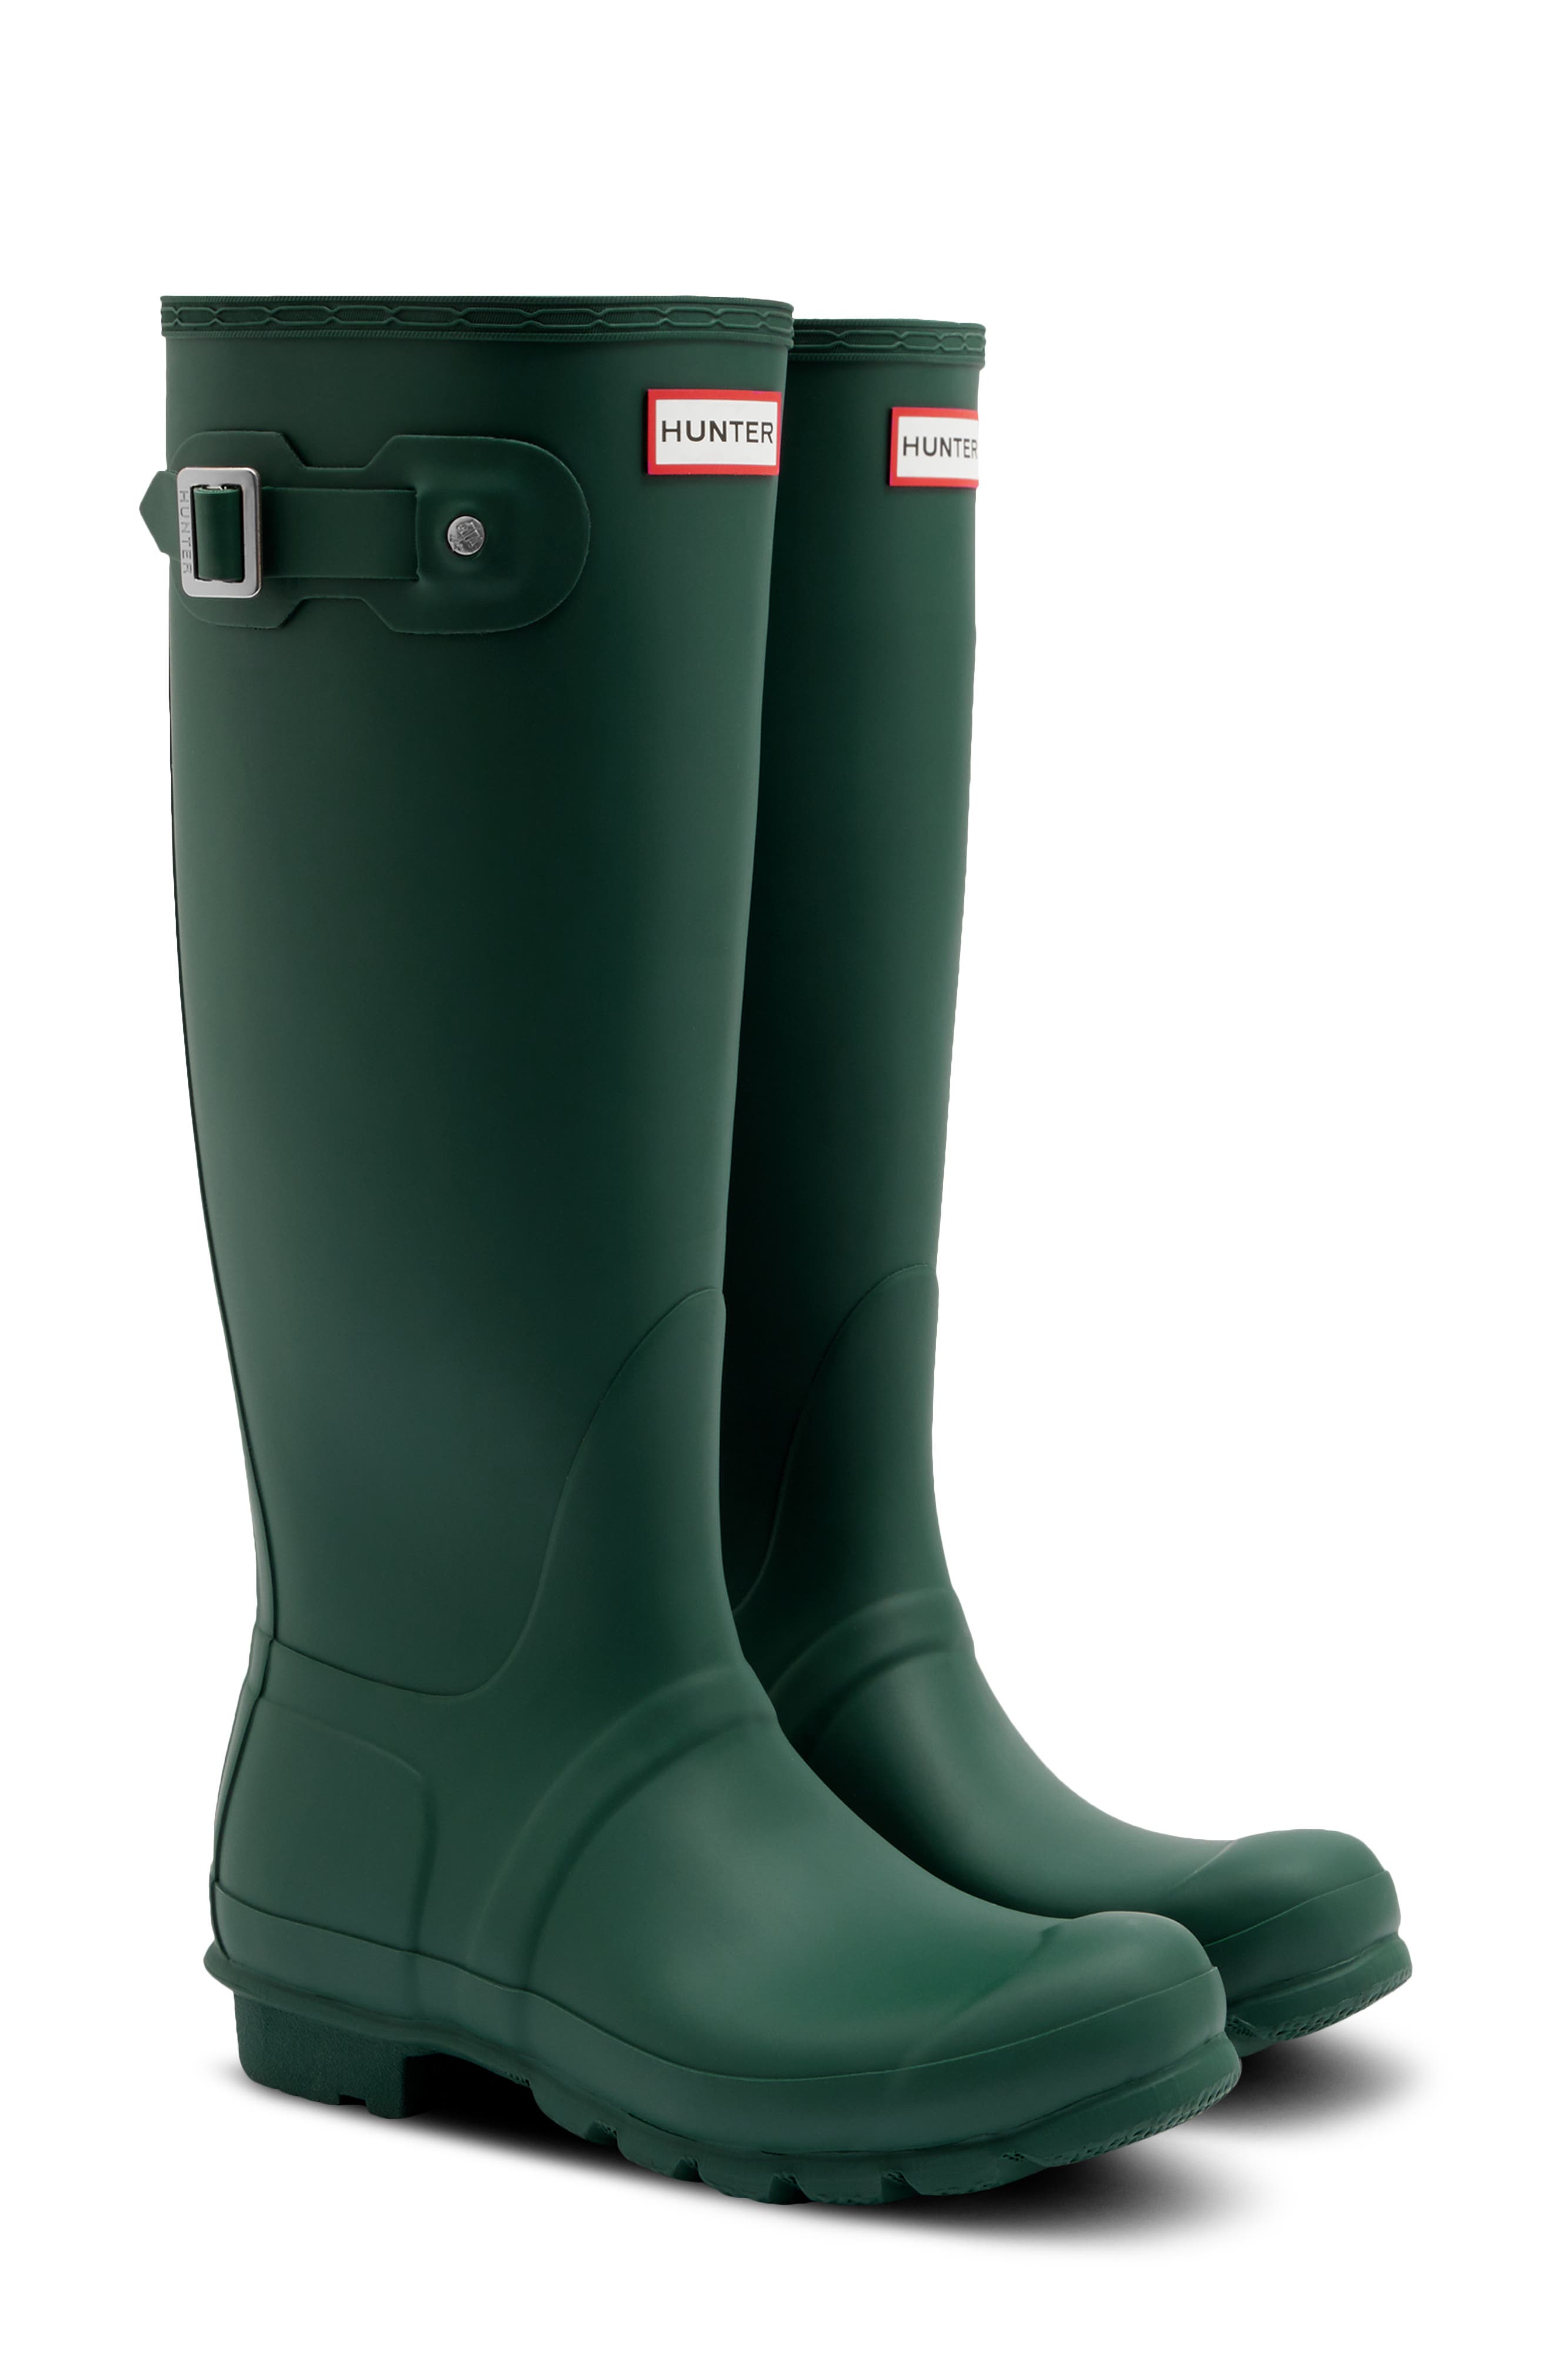 hunter boots in store